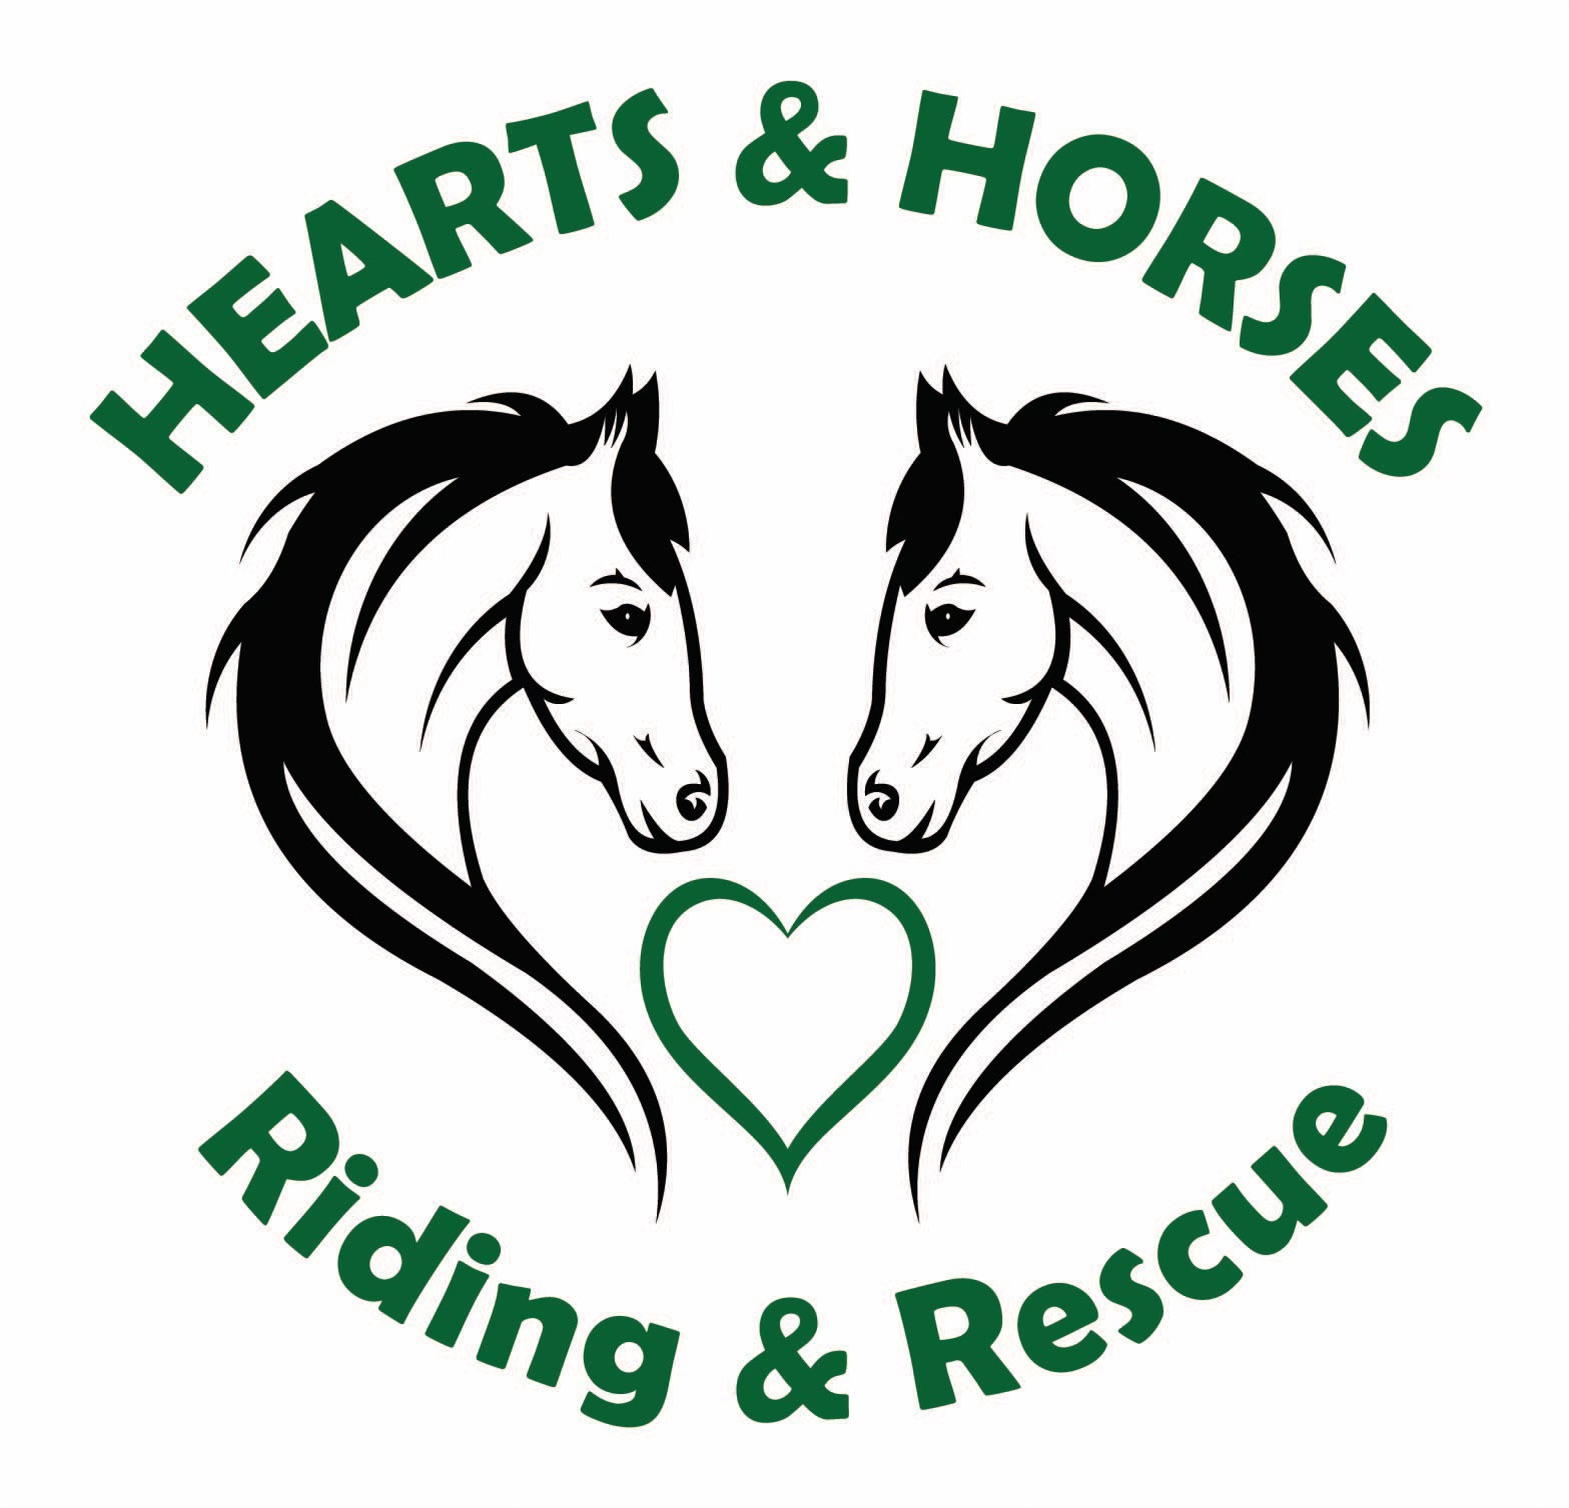 Hearts and Horse Riding and Rescue